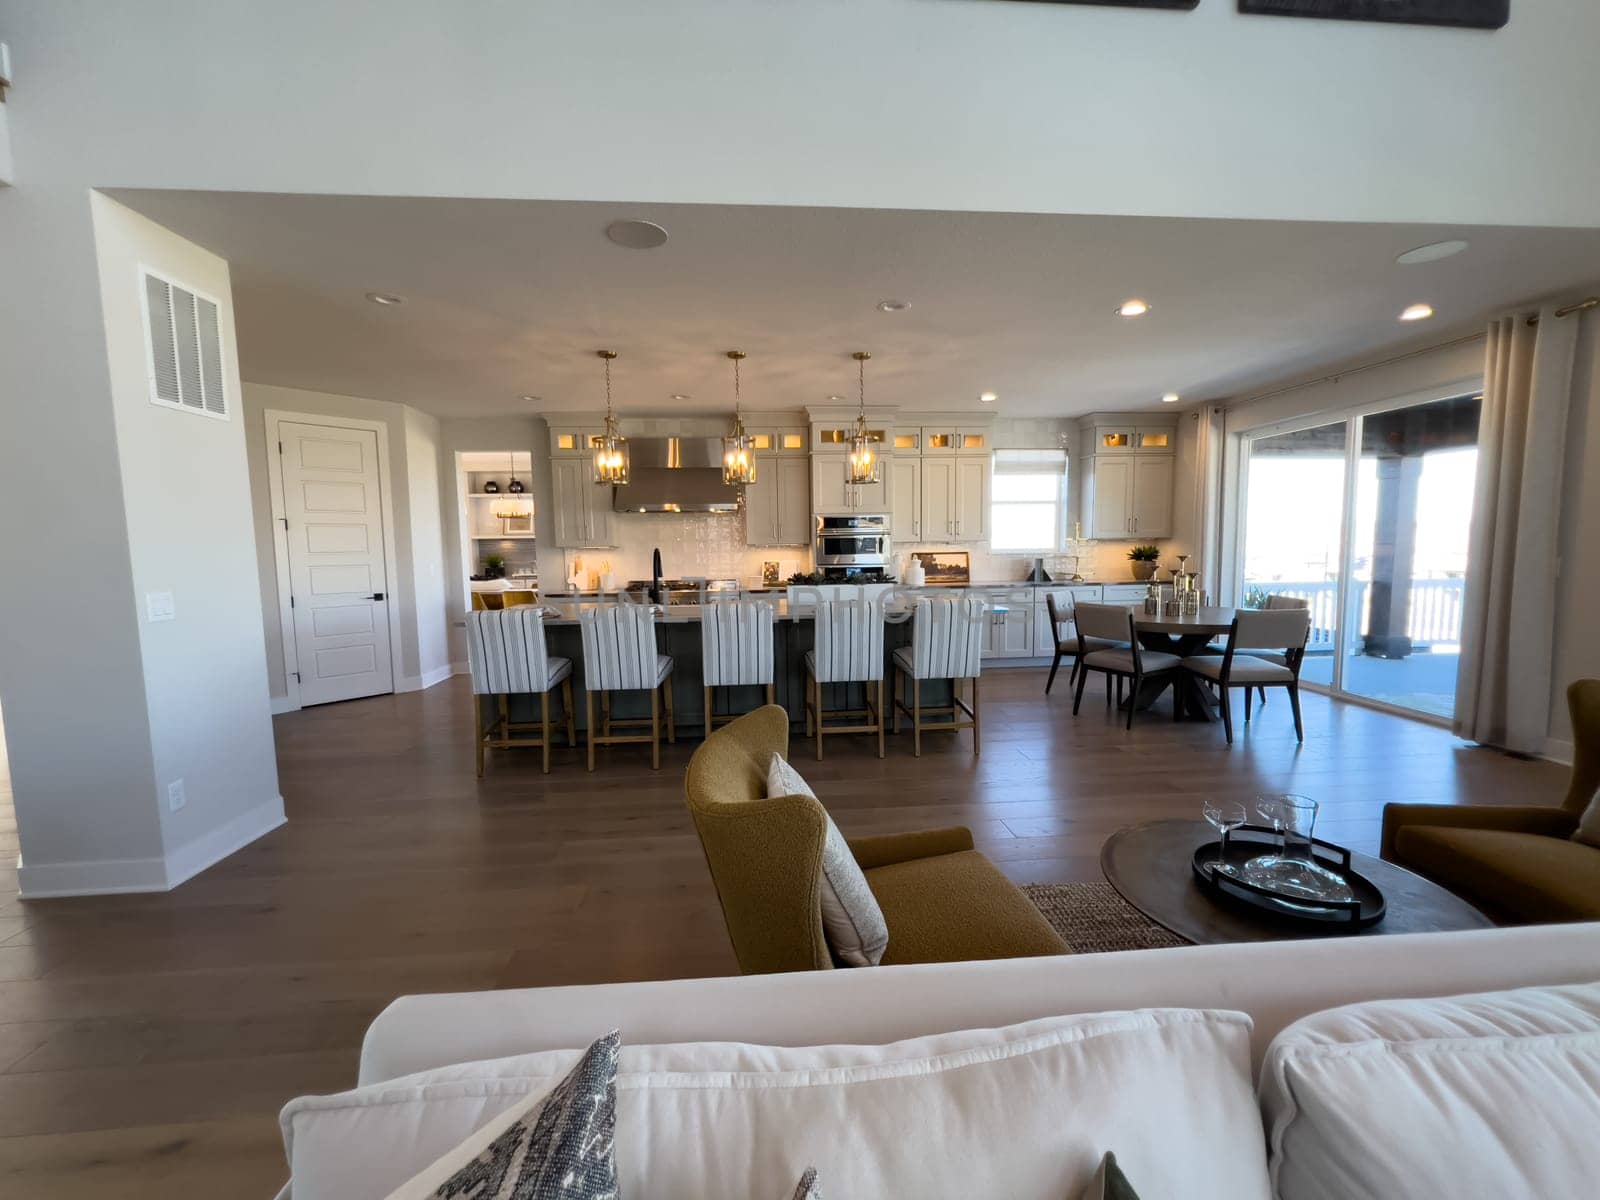 This spacious open-plan kitchen boasts white cabinetry, luxurious gold light fixtures, and a large island with stylish bar seating, ideal for family gatherings and entertaining guests.